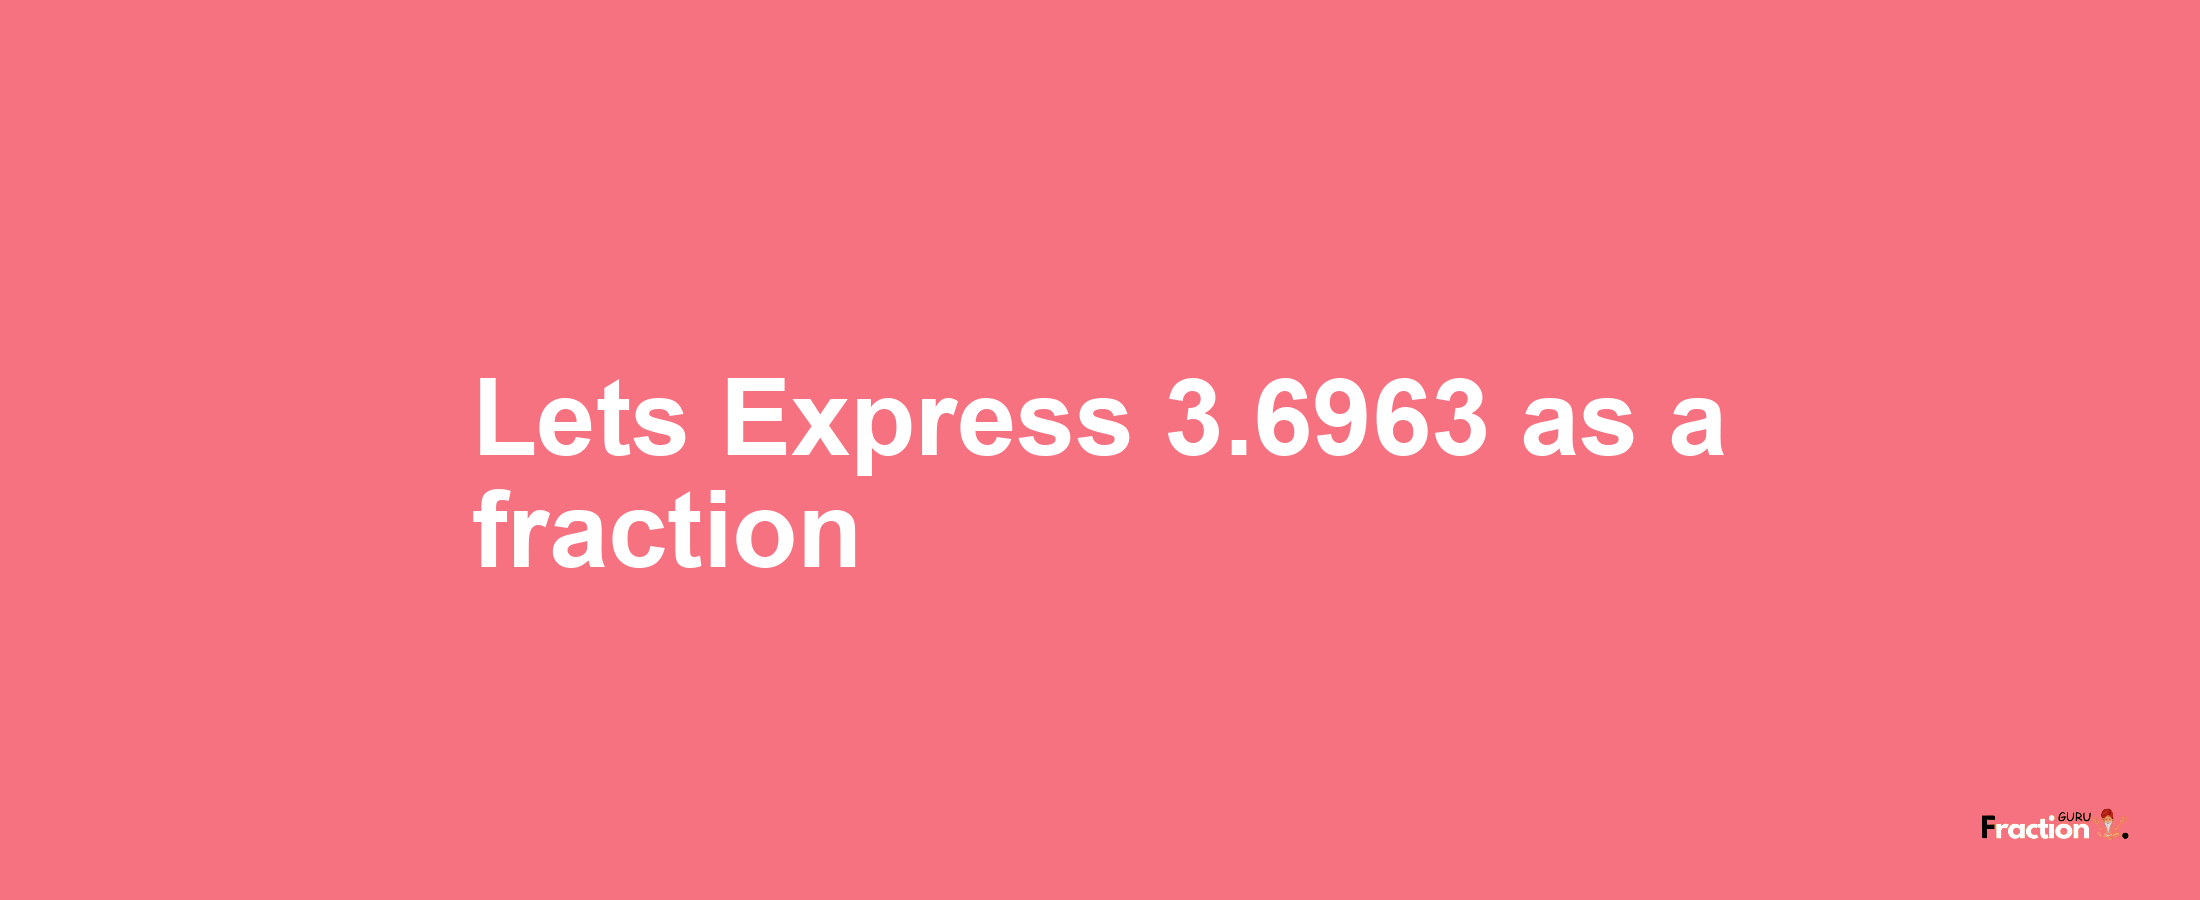 Lets Express 3.6963 as afraction